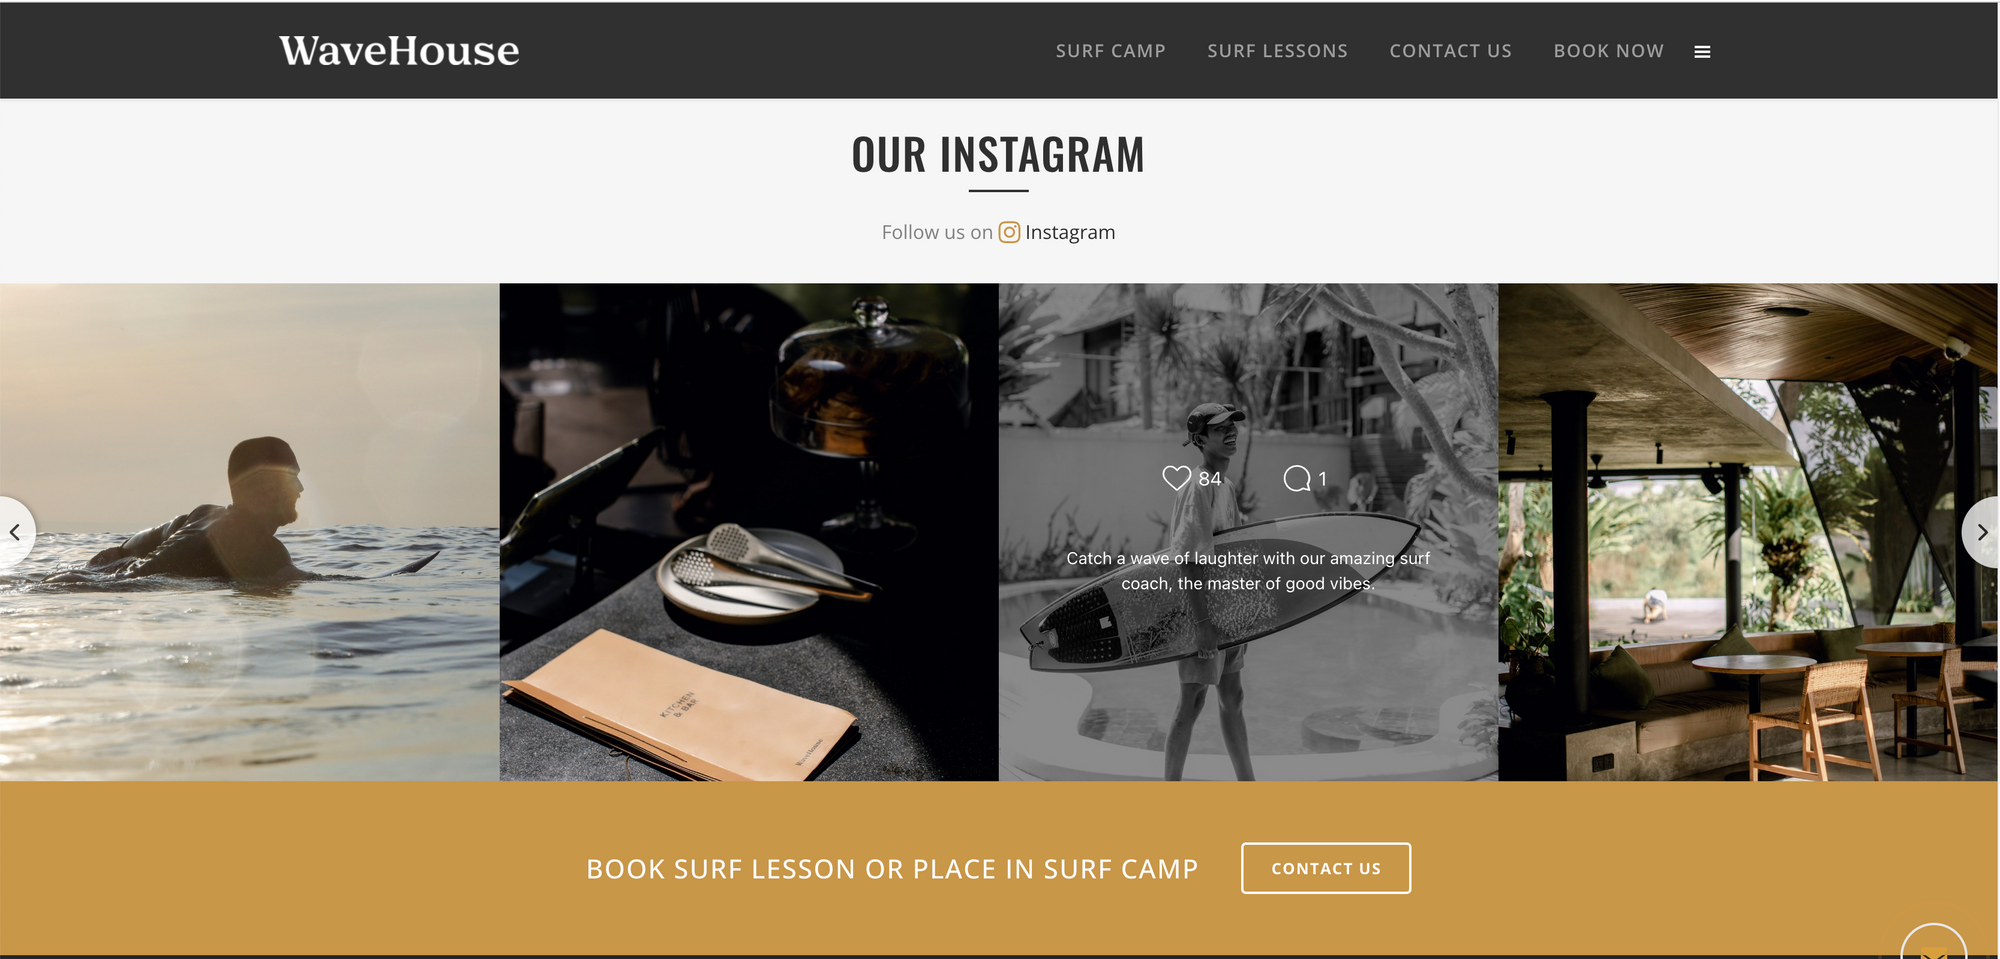 An example of a Instagram feed integrated into a website